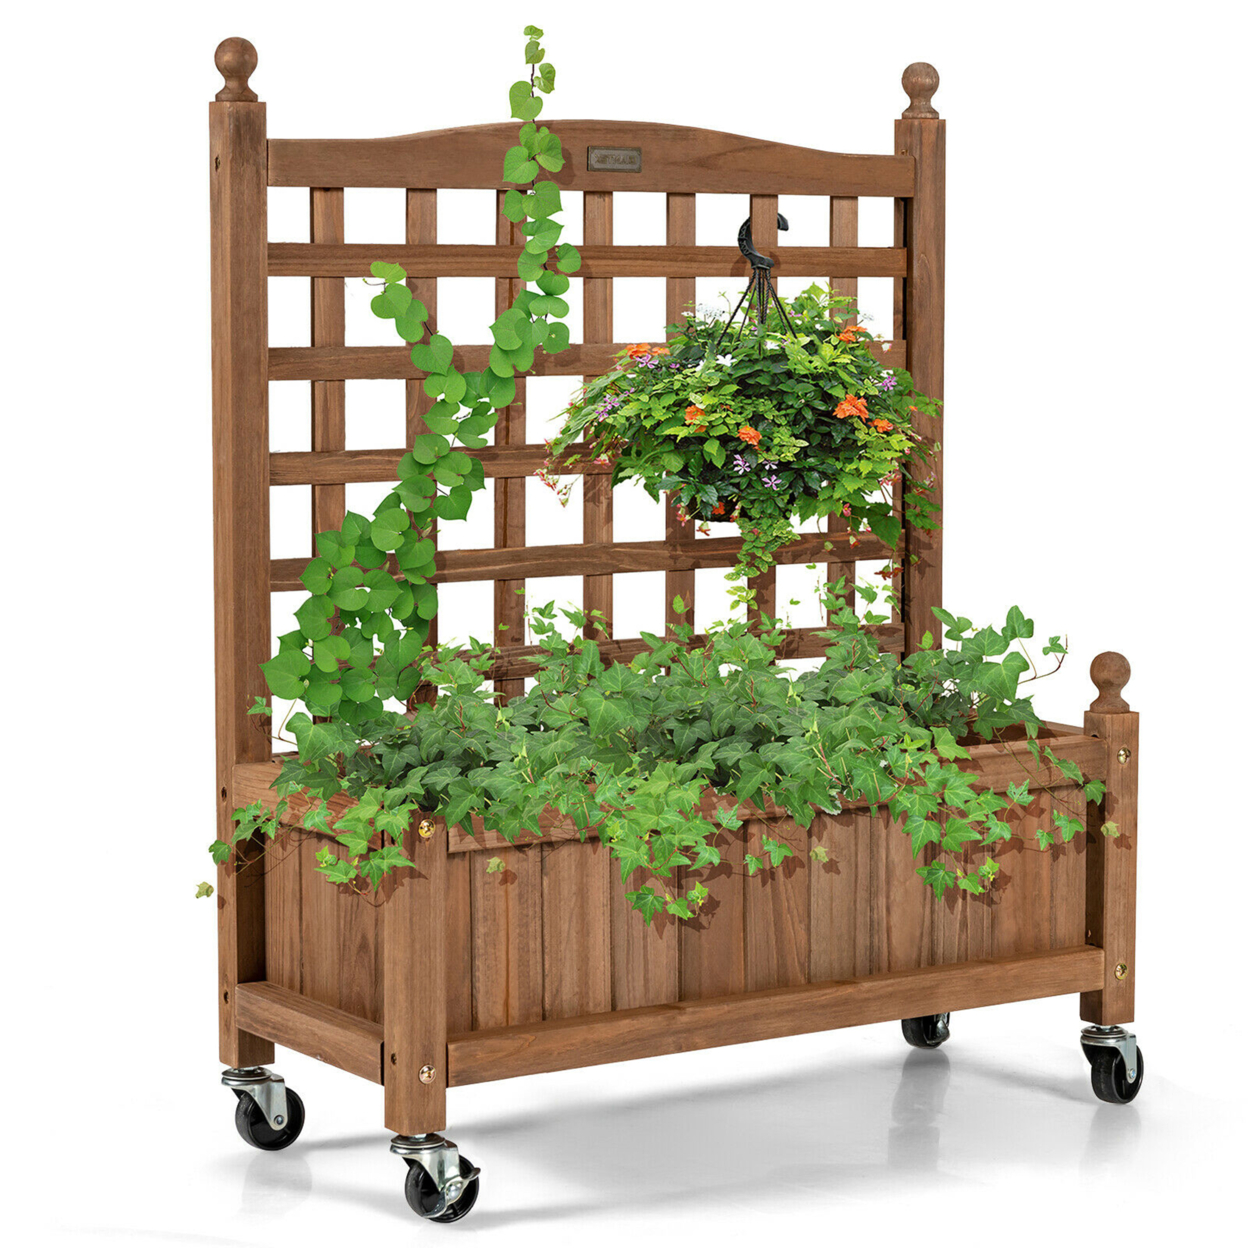 32in Wood Planter Box W/Trellis Mobile Raised Bed For Climbing Plant